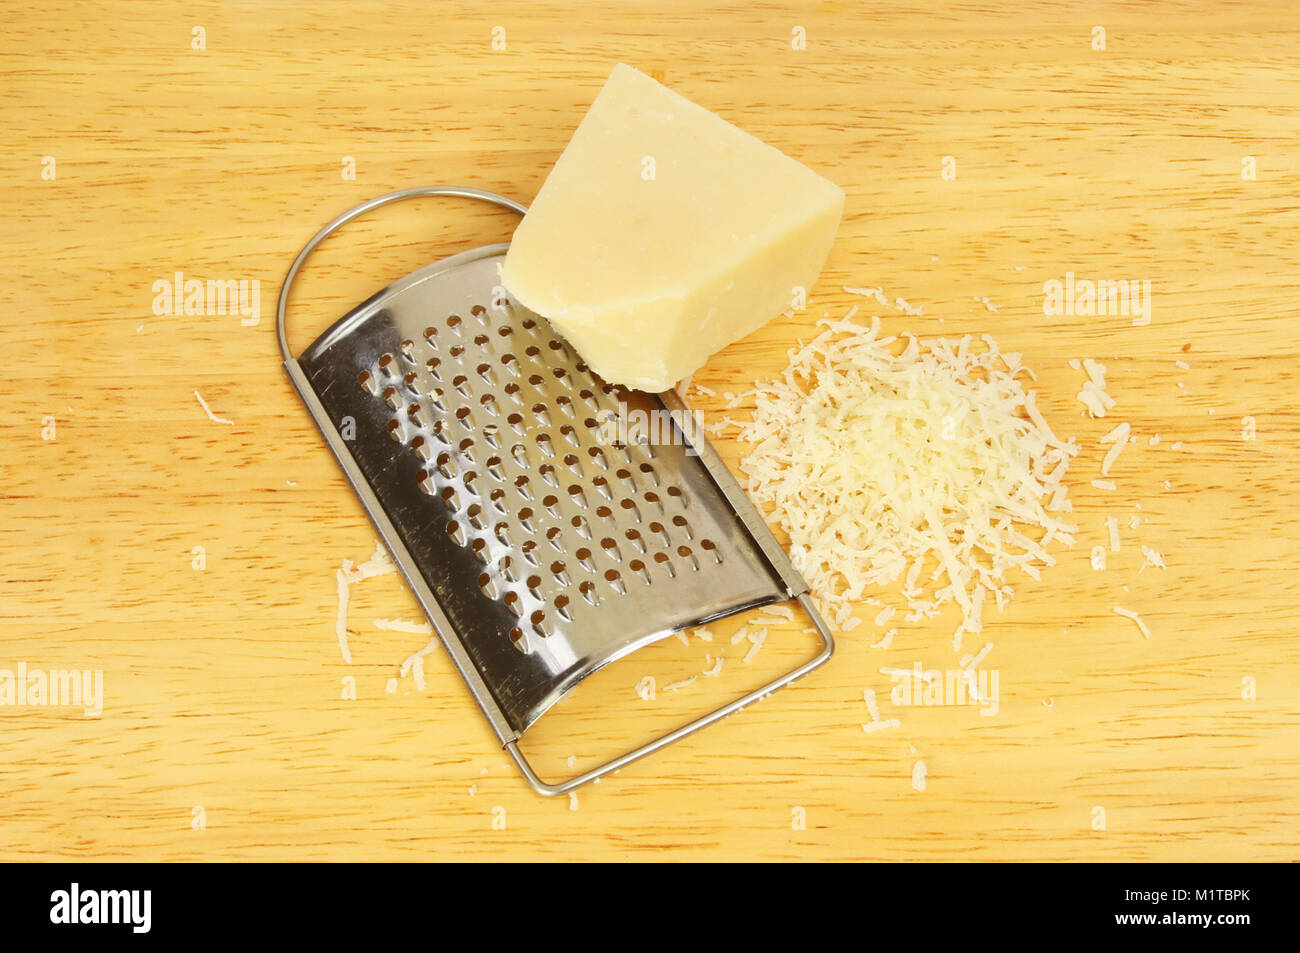 https://c8.alamy.com/comp/M1TBPK/parmesan-cheese-and-grater-on-a-wooden-chopping-board-M1TBPK.jpg